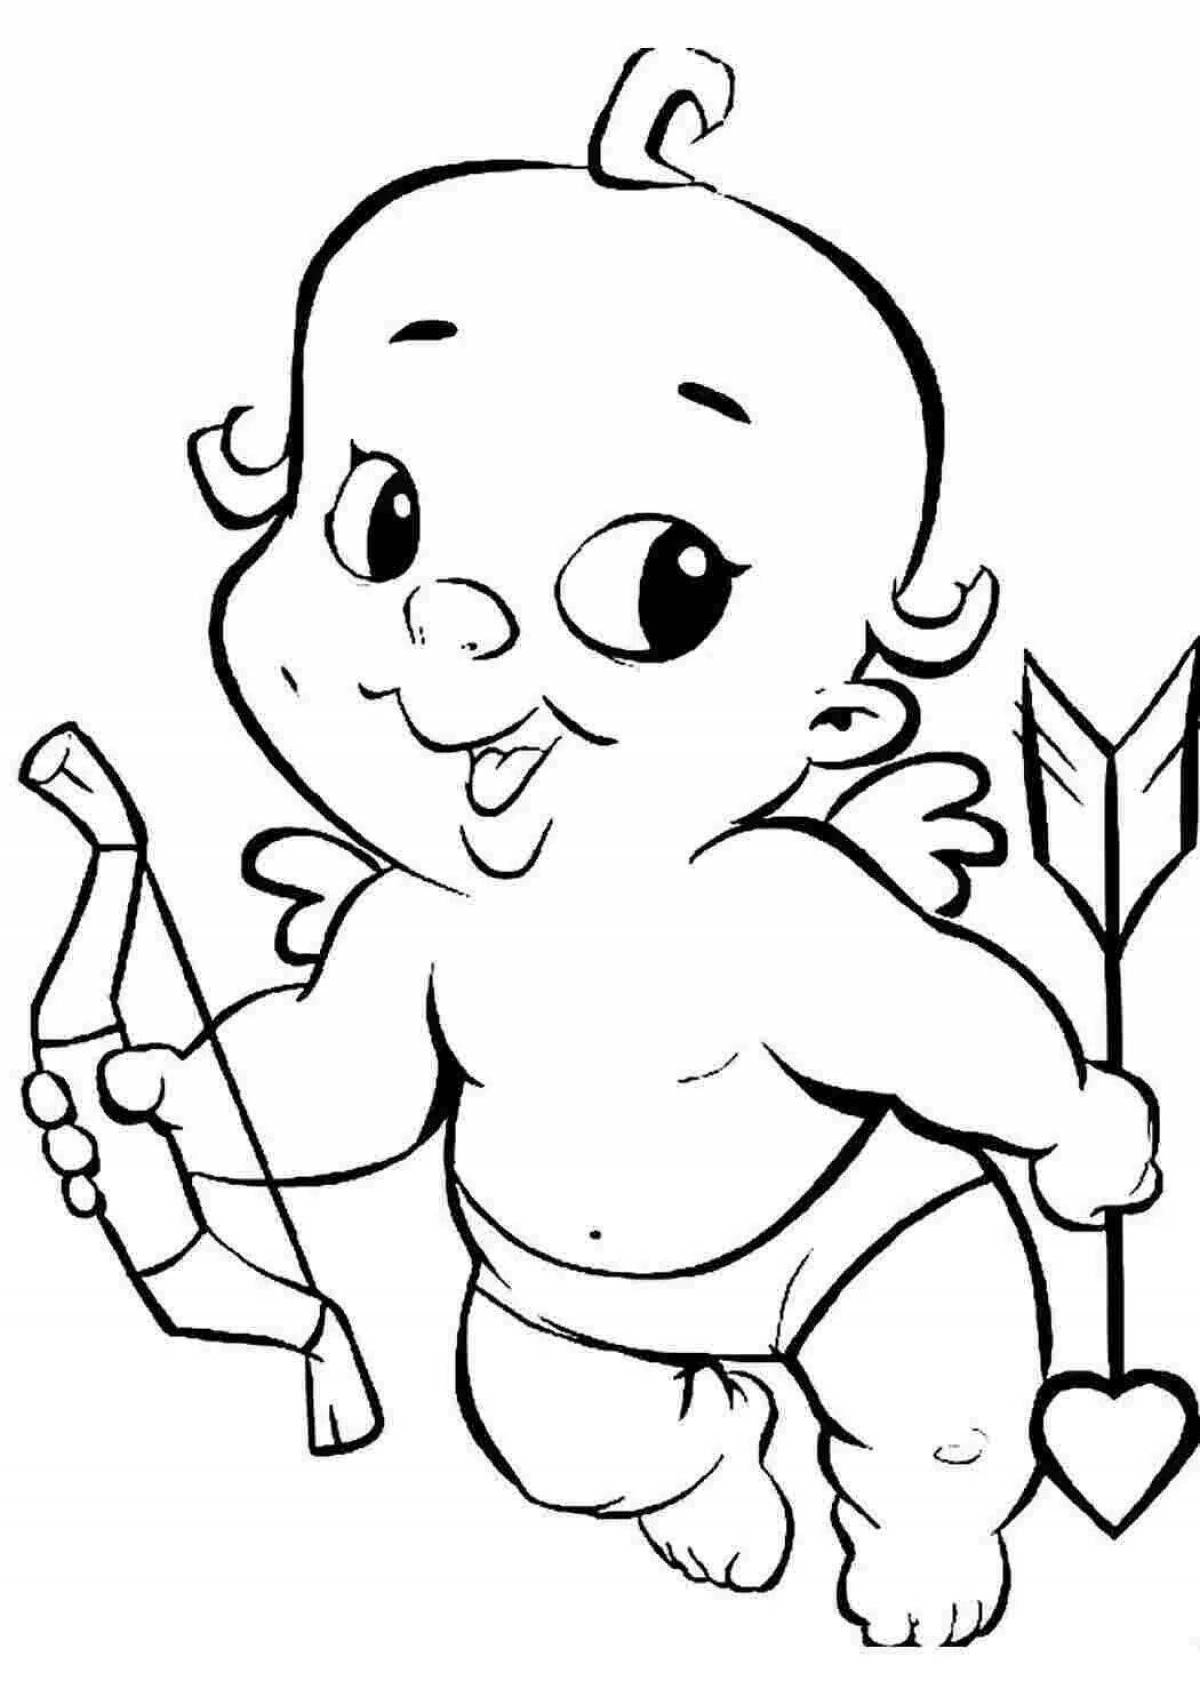 Glowing cupid coloring page